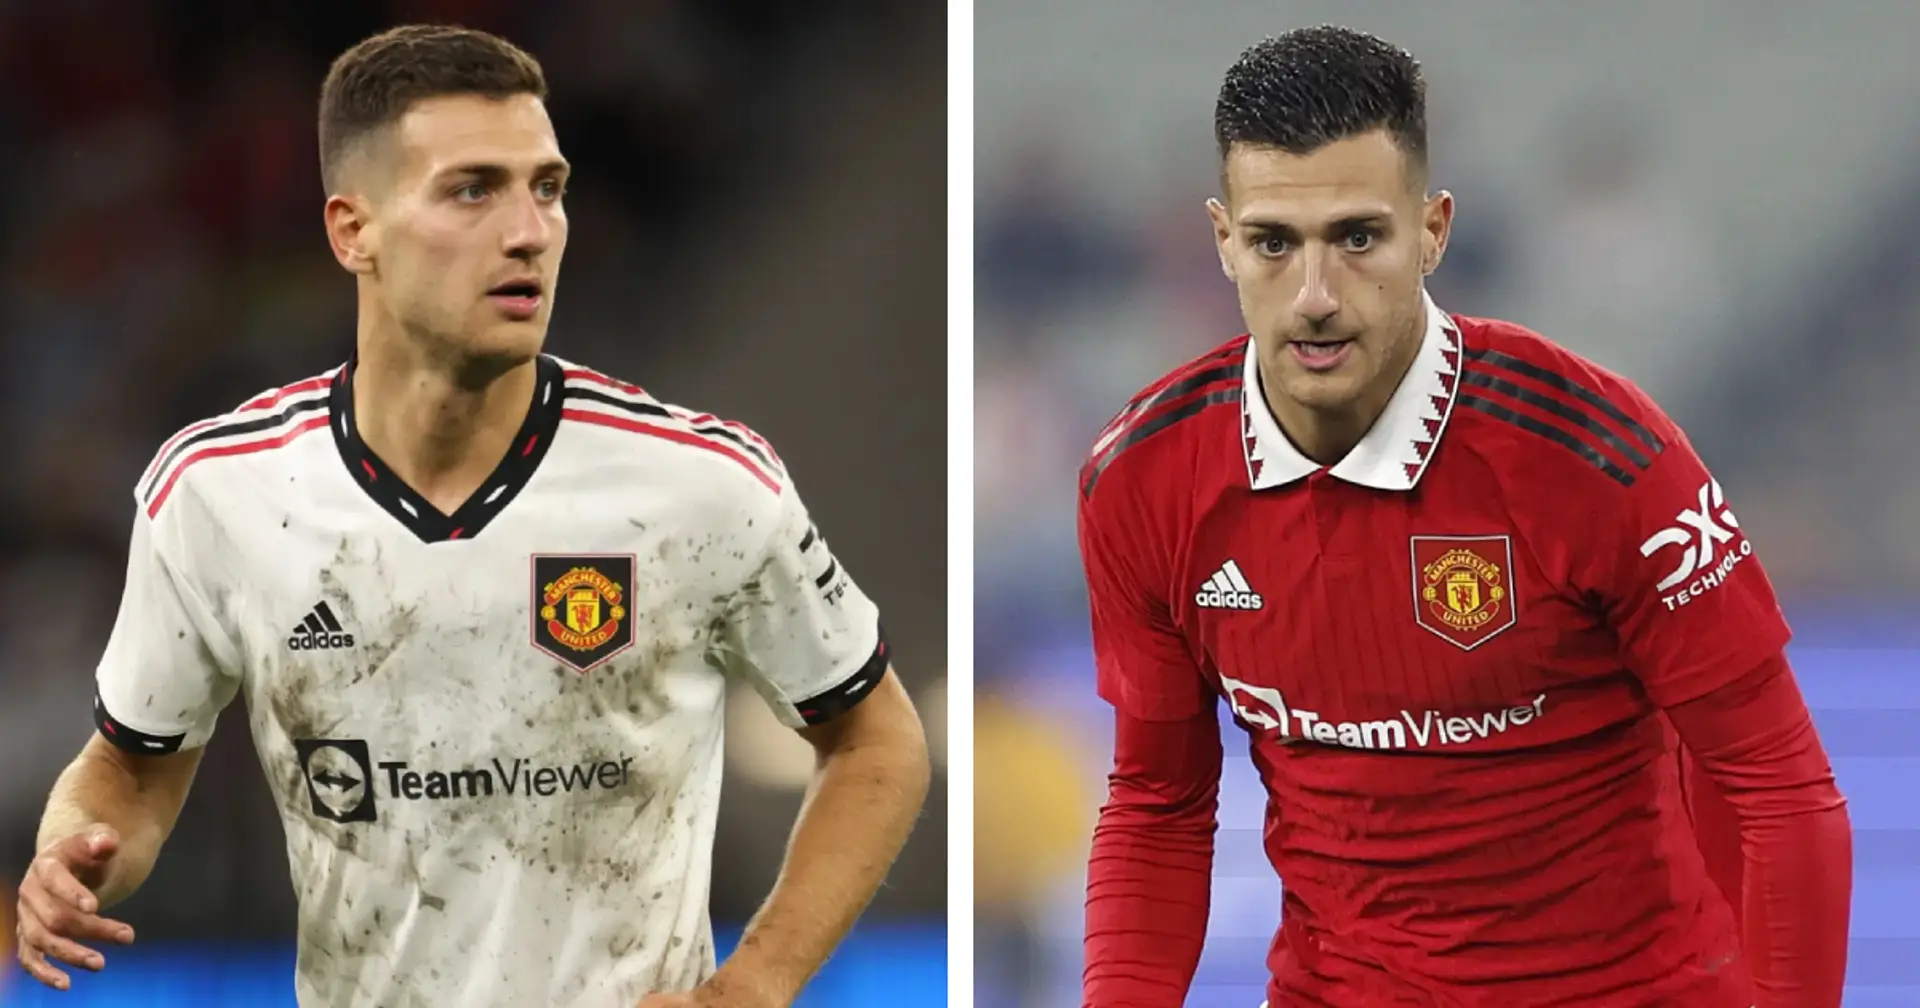 'Kid can't play football': Man United fans don't rate Diogo Dalot's abilities